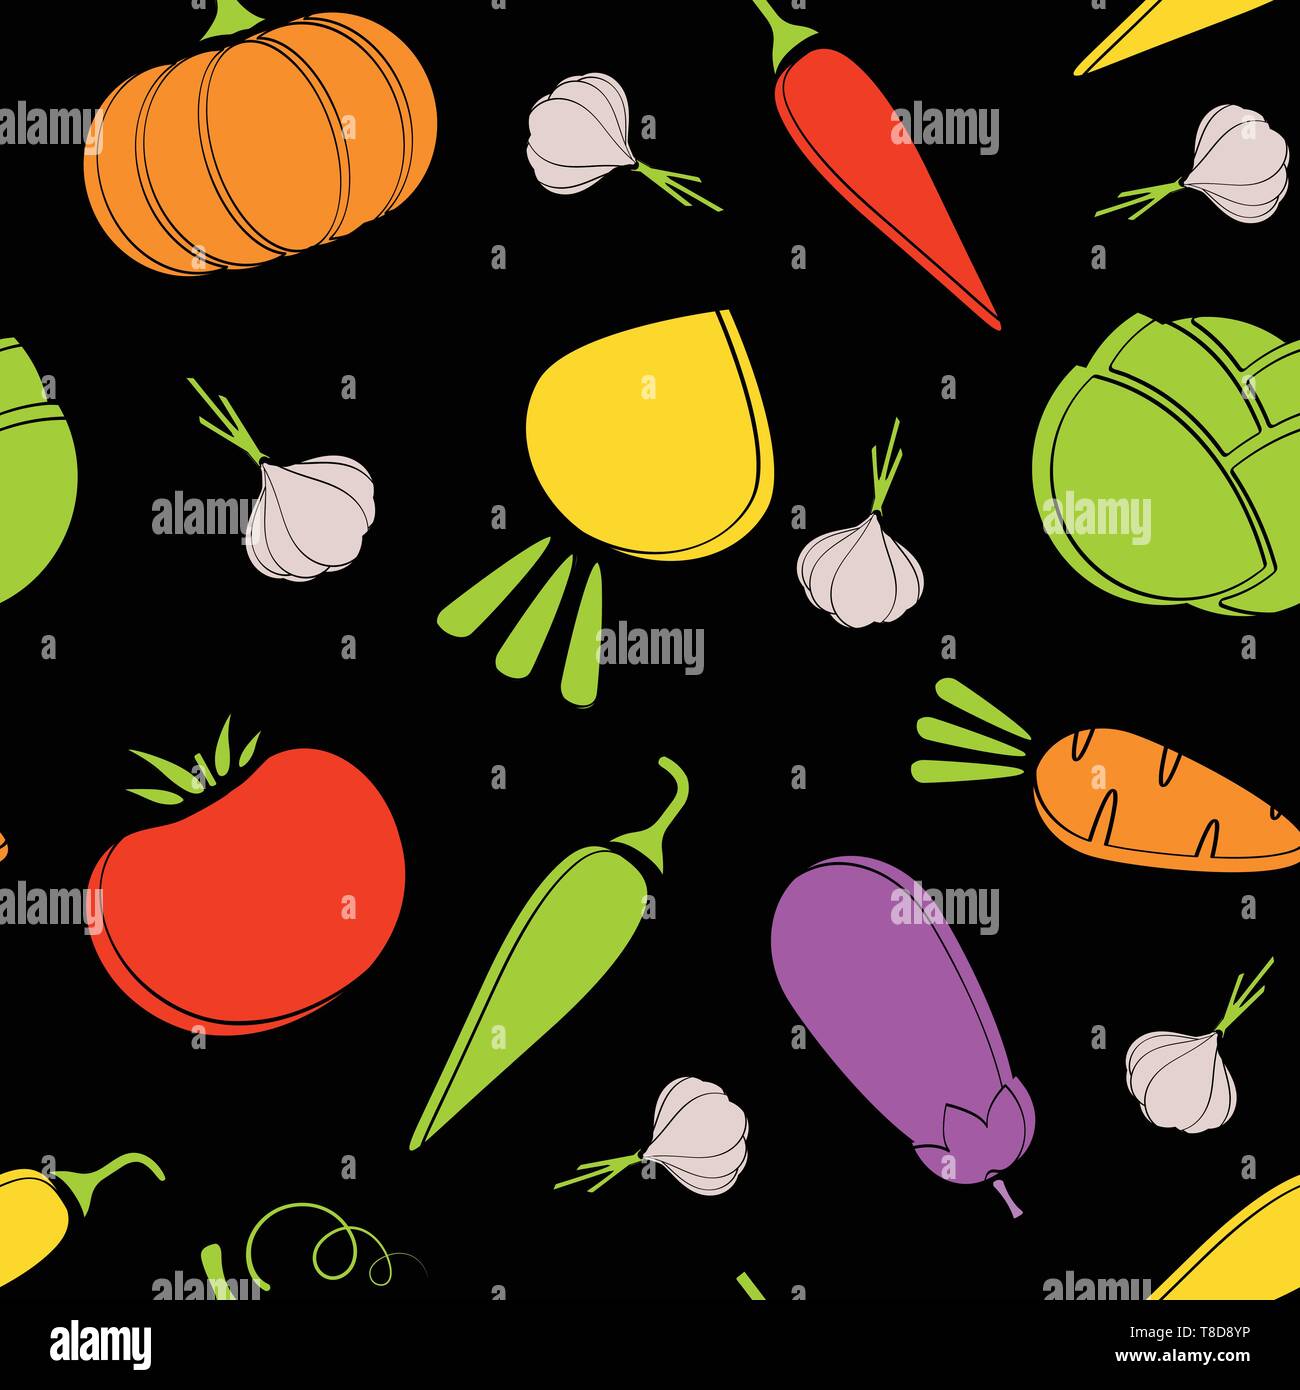 Outline seamless vegetable pattern vector flat illustration. Modern black pattern design with autumn vegetable seamless texture in natural colors for healthy diet decor or vintage wallpaper Stock Vector